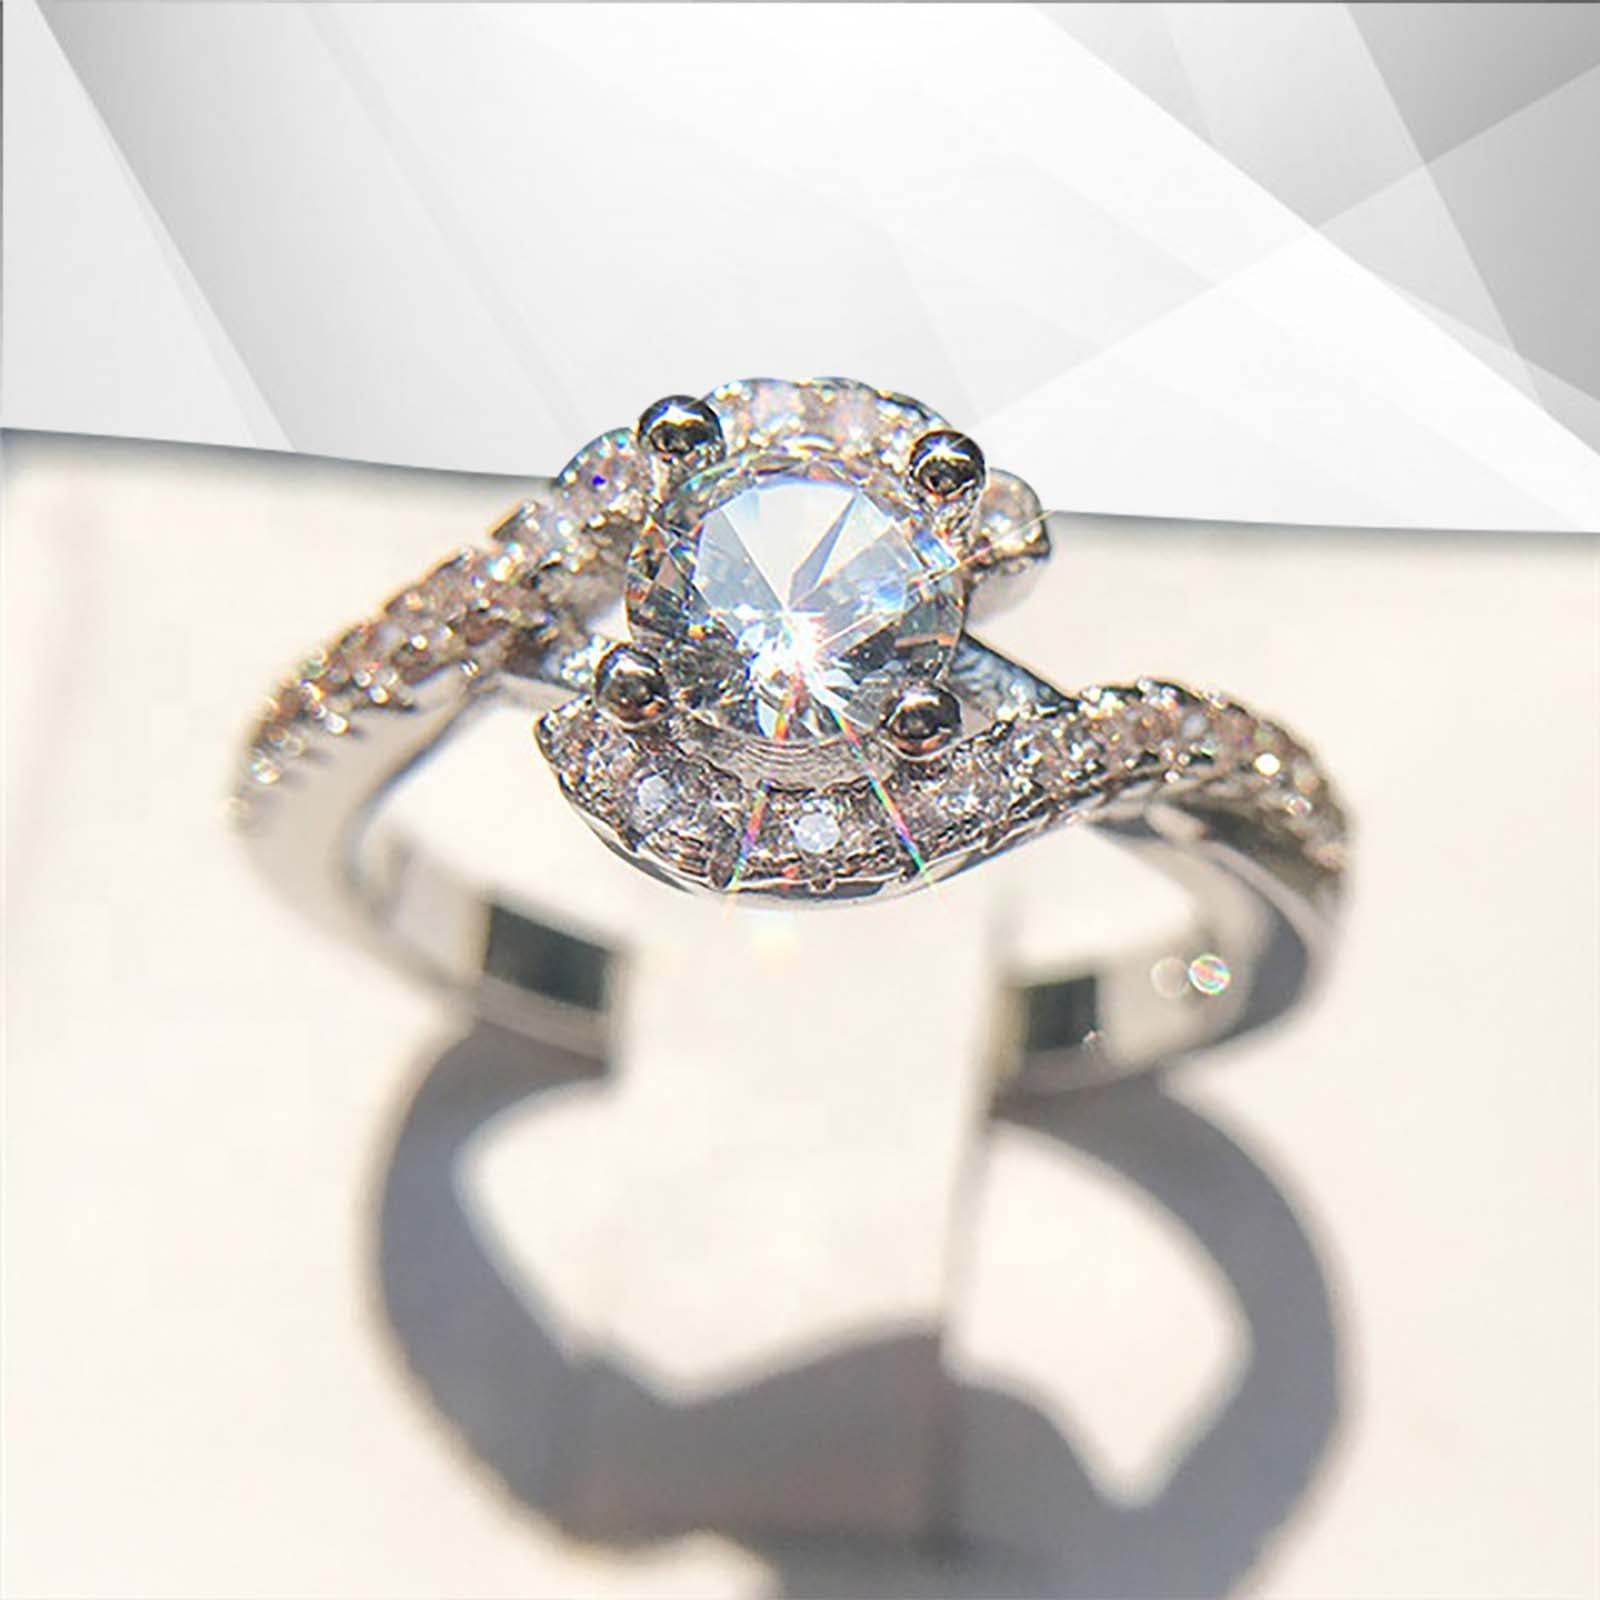 Nature-Inspired Halo Ring with Cambodian CZ Diamond | 2.00Ct Total | Hypoallergenic & Free Worldwide Shipping - Jewelry & Watches - Bijou Her -  -  - 